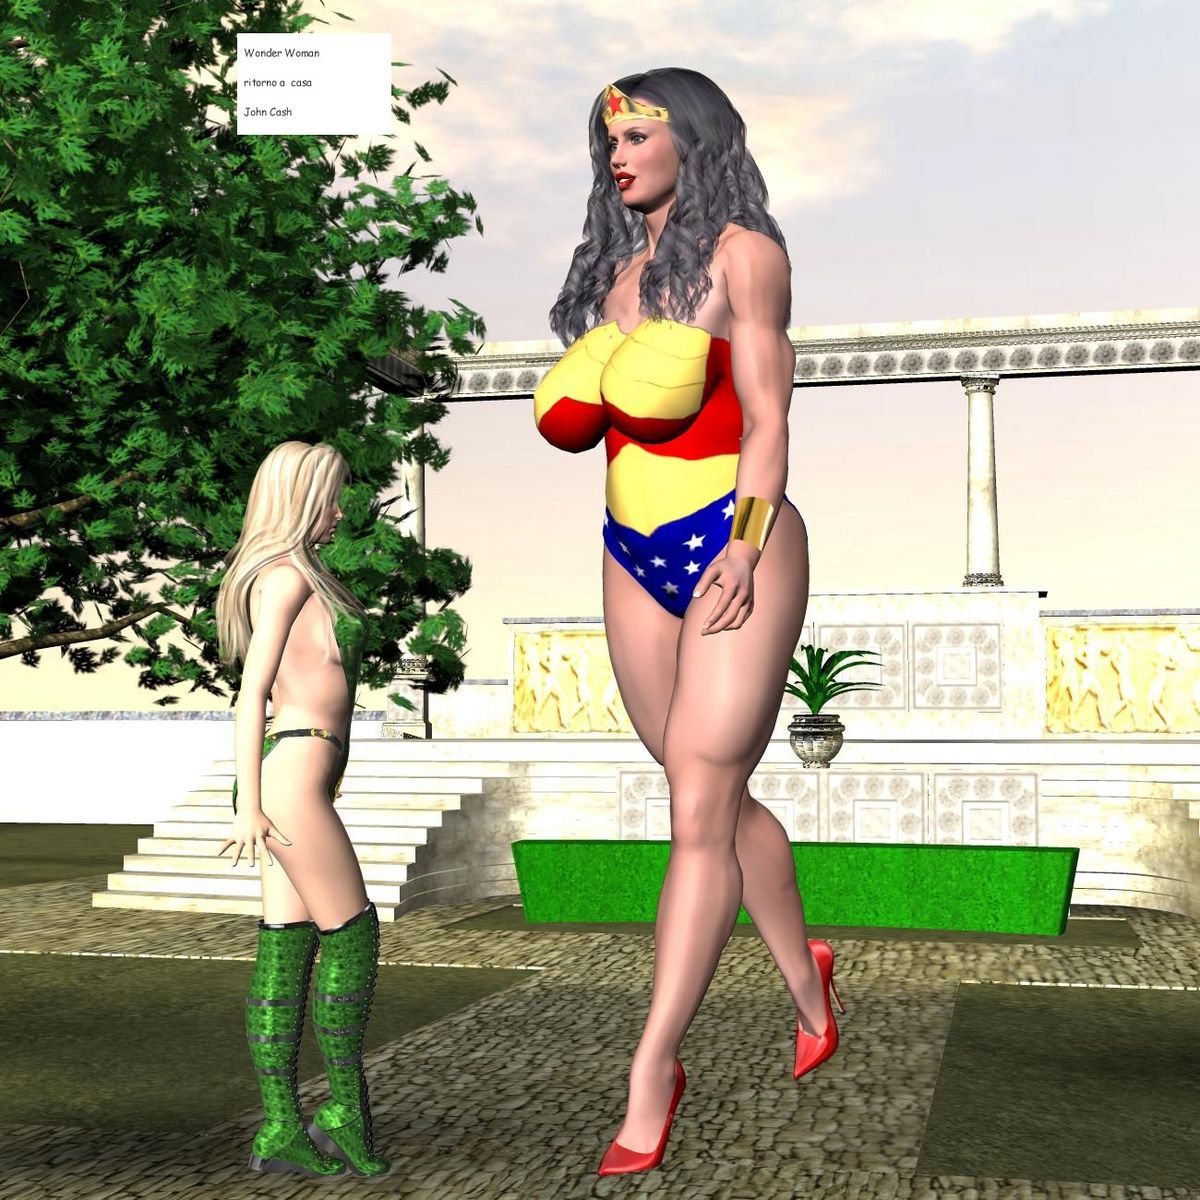 Wonder Woman and other heroines 171